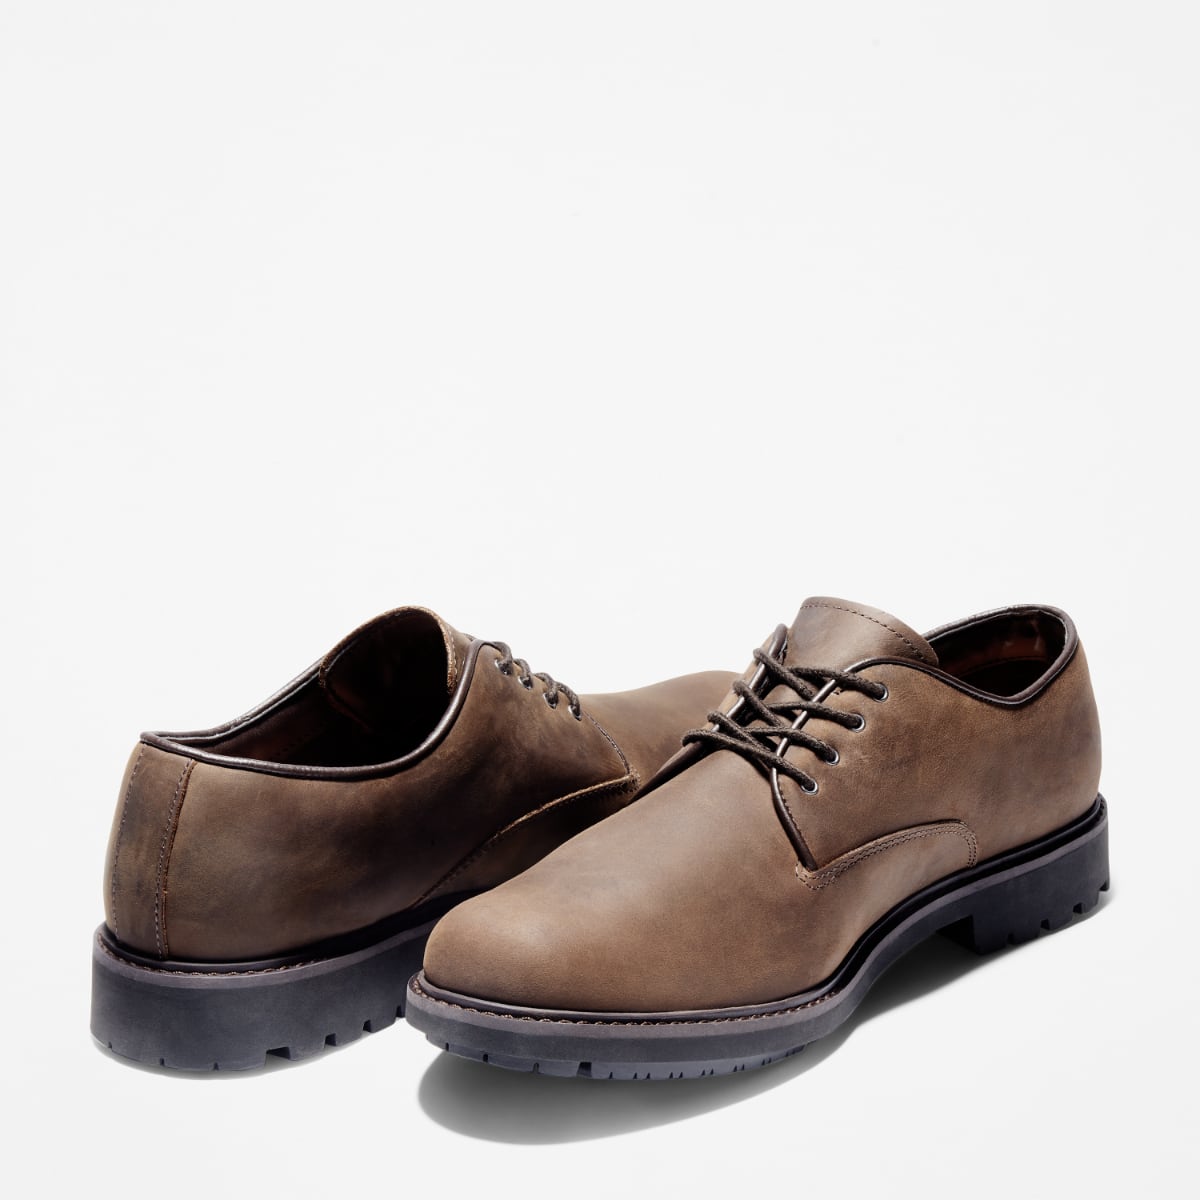 Timberland Earthkeepers Stormbuck Plain Toe Oxford Men's Shoes | Burnished Dark Brown Oiled (Model TB 05550R242)